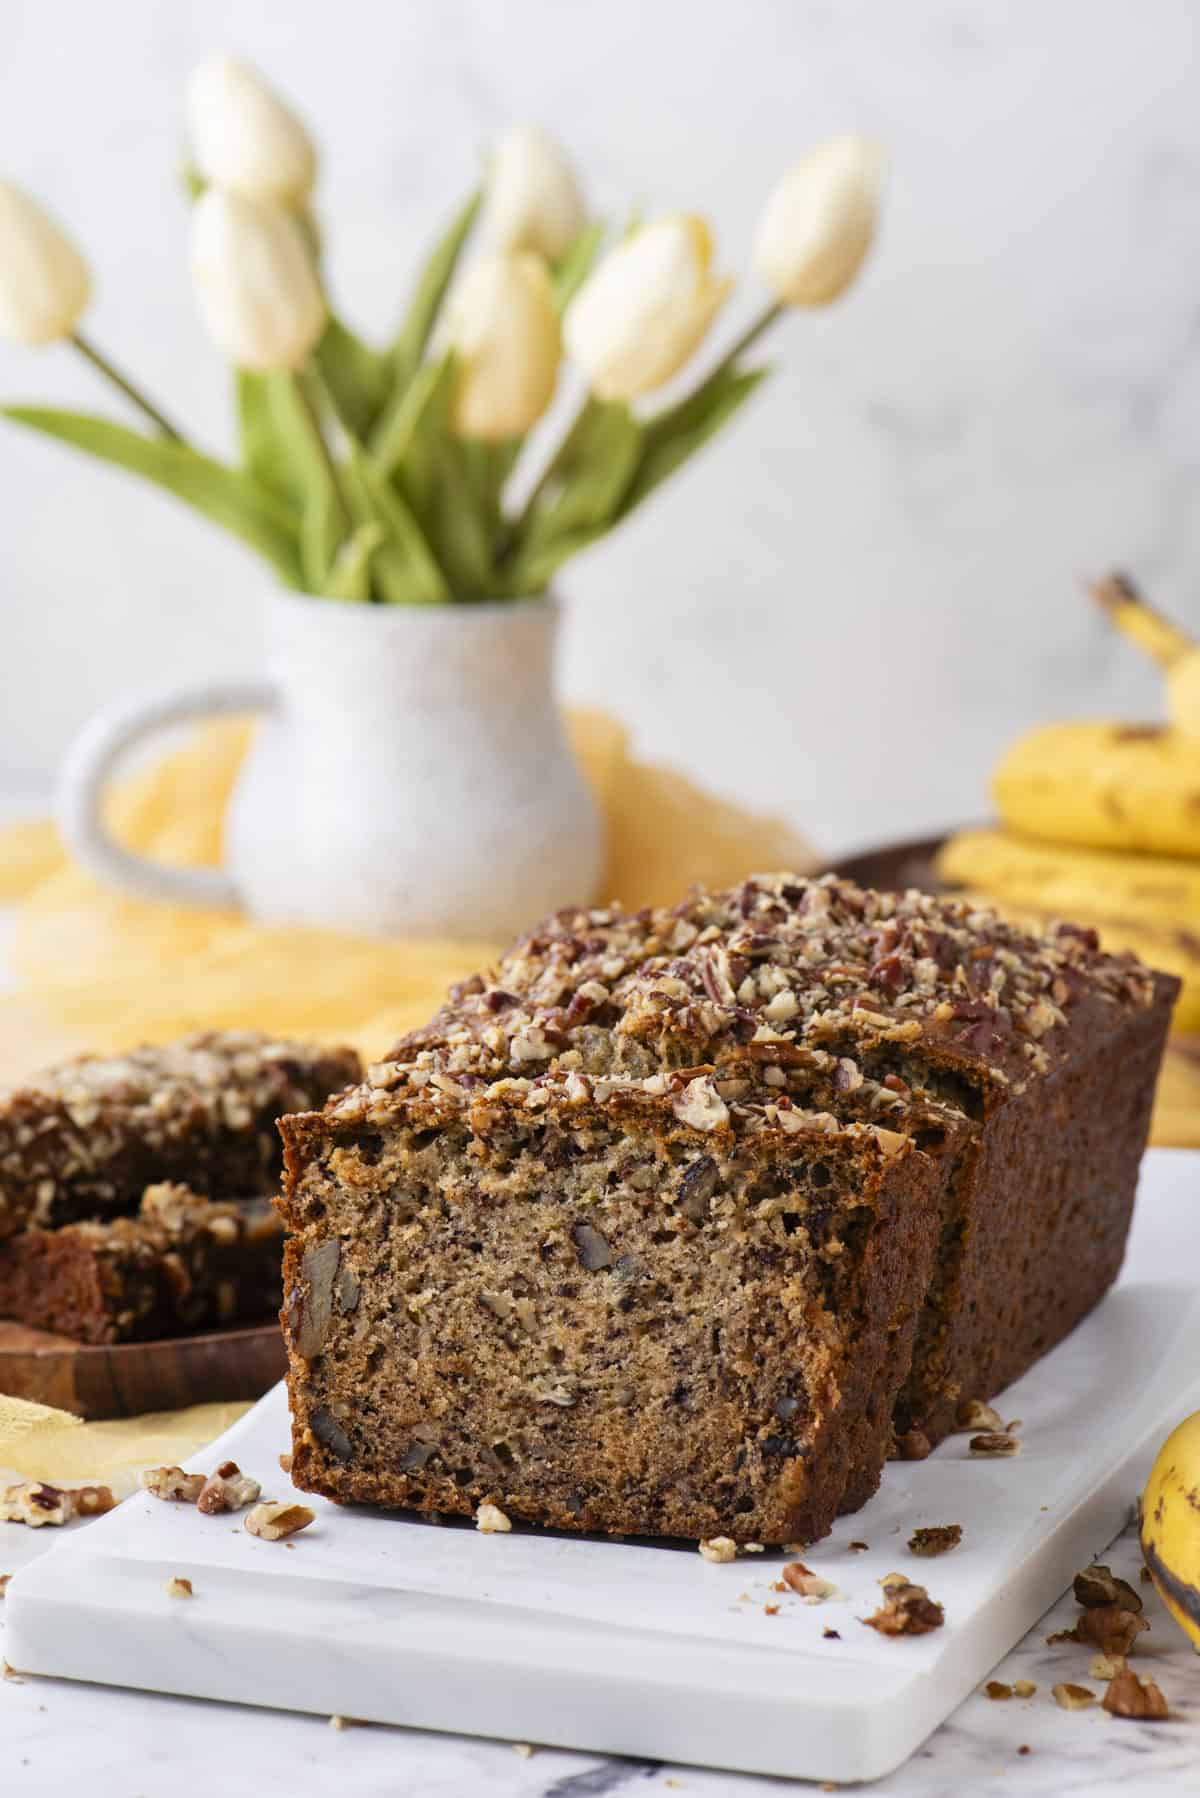 a loaf of banana nut bread on a white cutting board with chopped pecans scattered around, two slices on a wood plate, whole bananas, a yellow cloth and white vase of tulips in the background